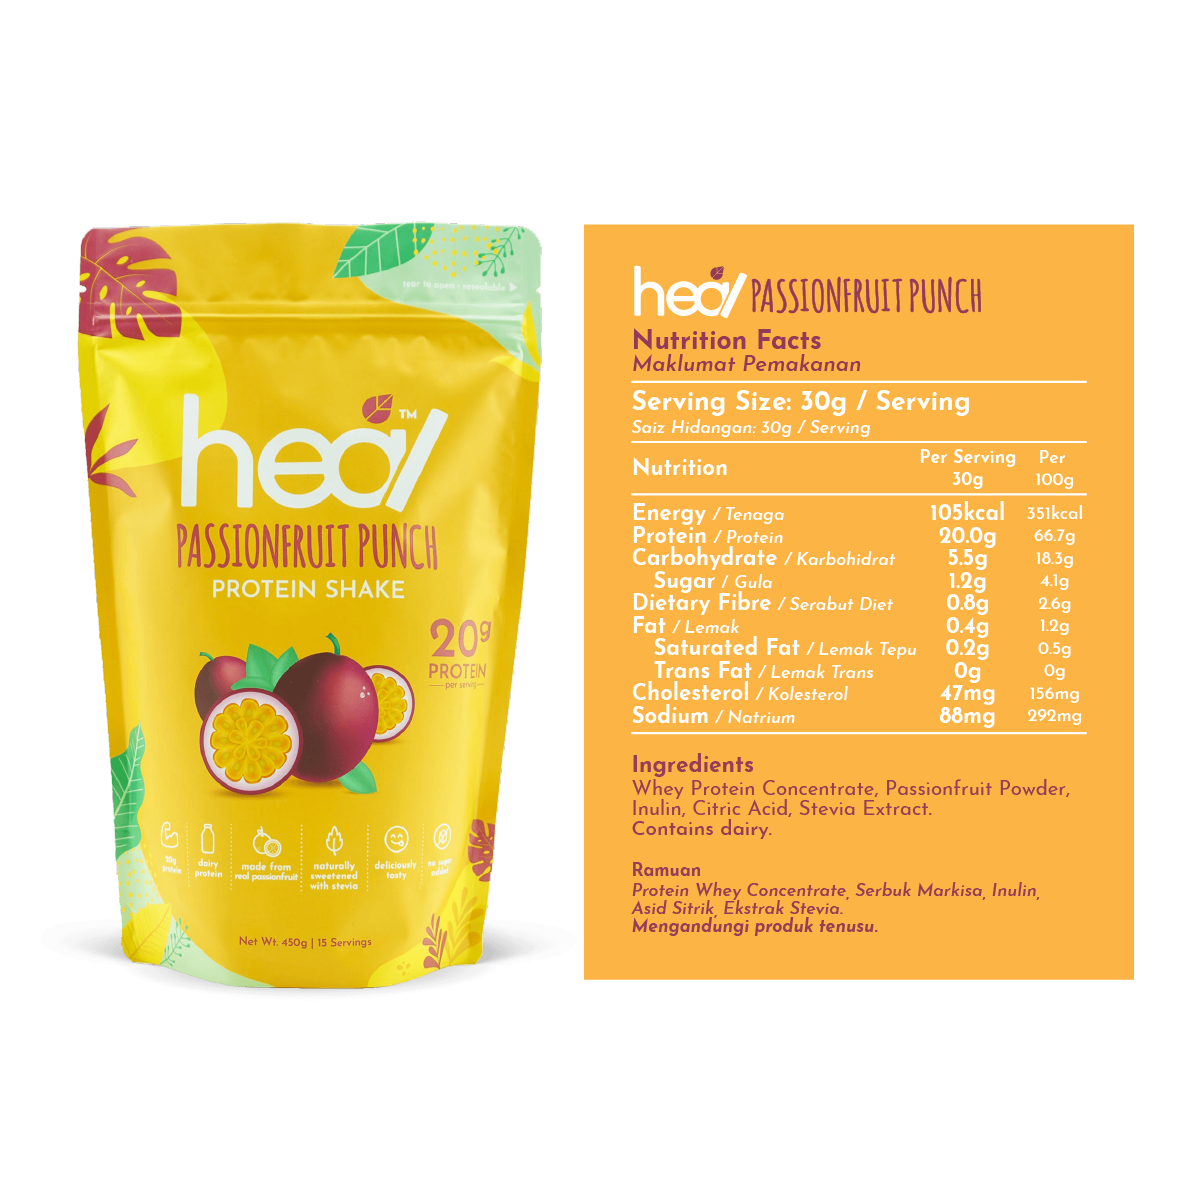 Heal Passionfruit Punch Protein Shake, 15 Servings Value Pack